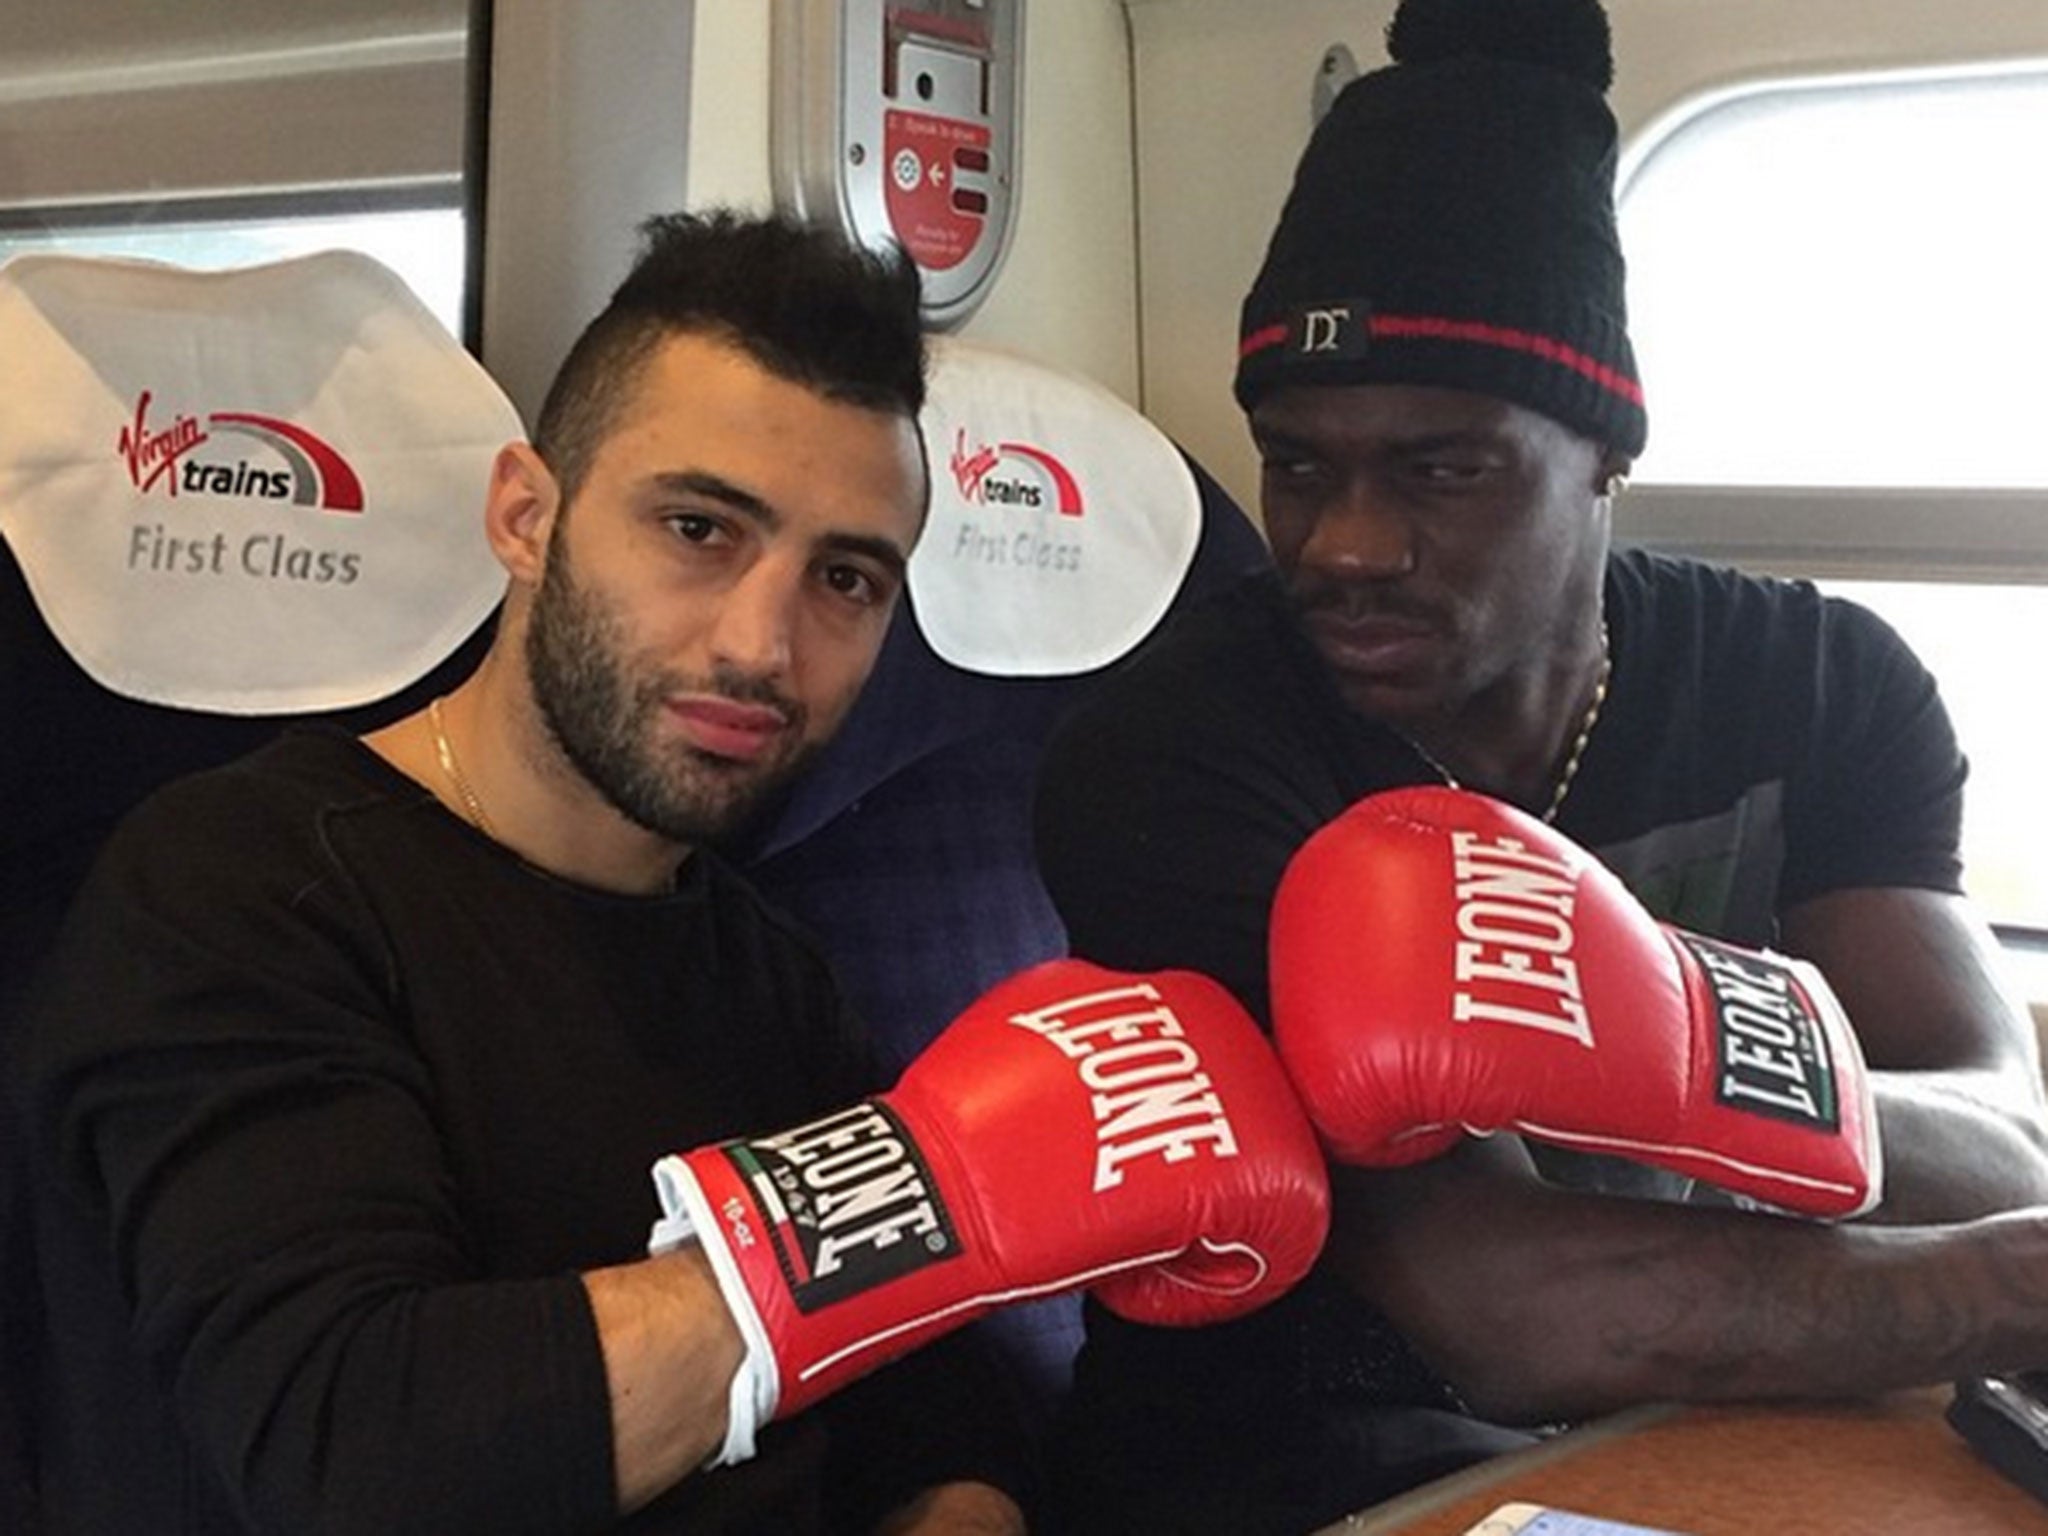 The kick-boxer Giorgio Petrosyan posted this picture with Mario Balotelli to his Instagram account